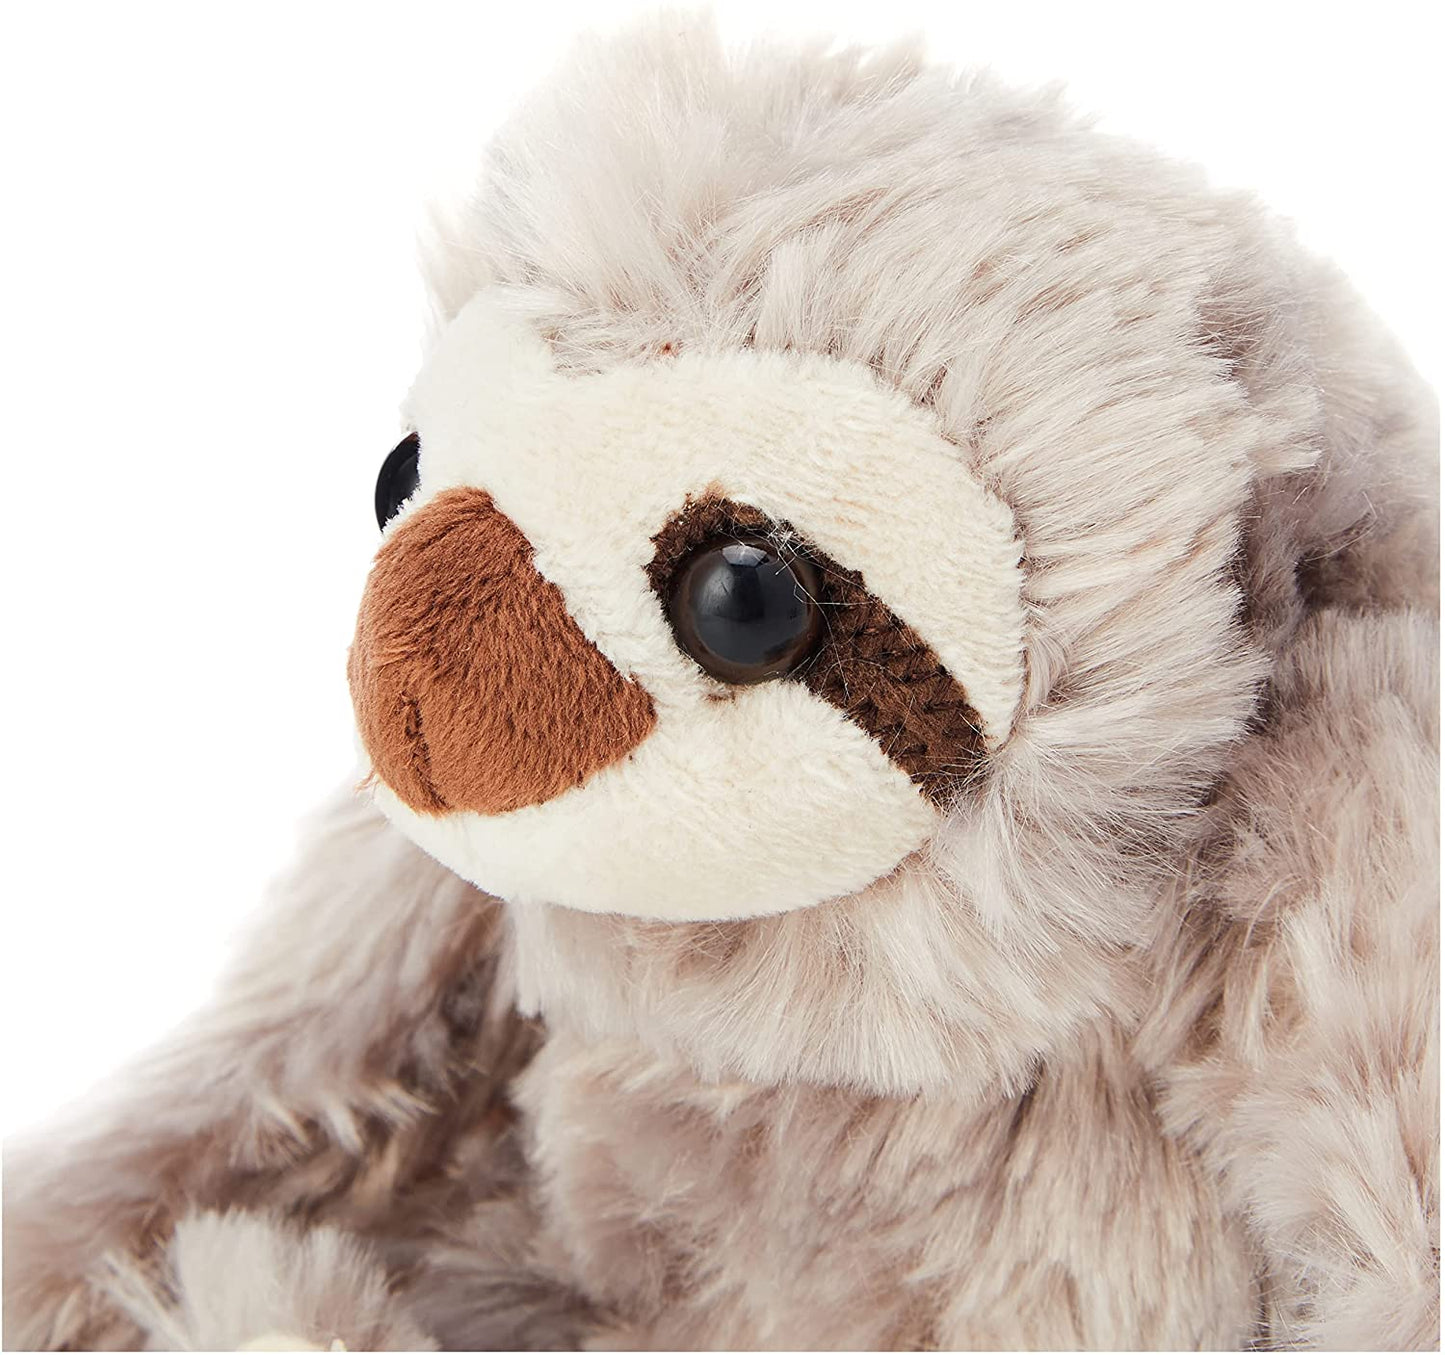 Wild Republic Pocketkins Sloth Stuffed Animal, Five Inches, Gift for Kids, Plush Toy, Fill is Spun Recycled Water Bottles, 5 inches